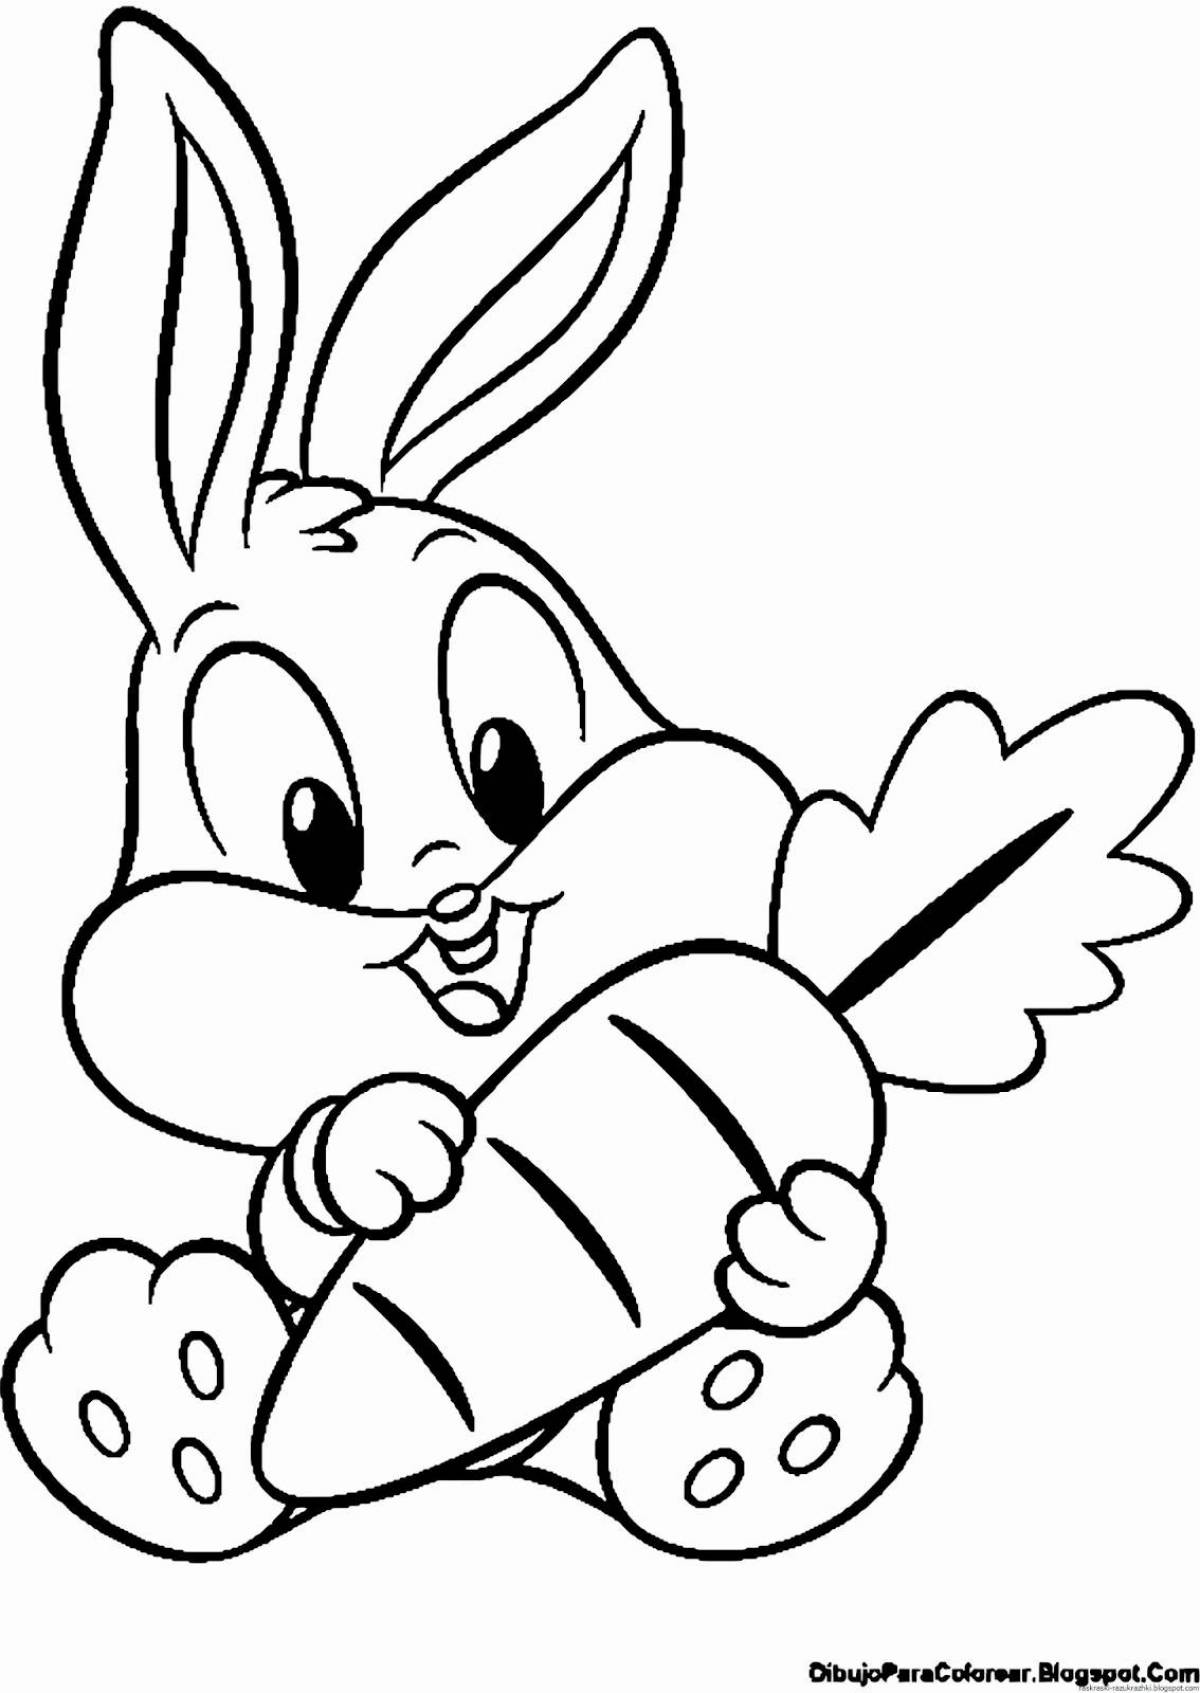 Grinning bunny coloring book for kids